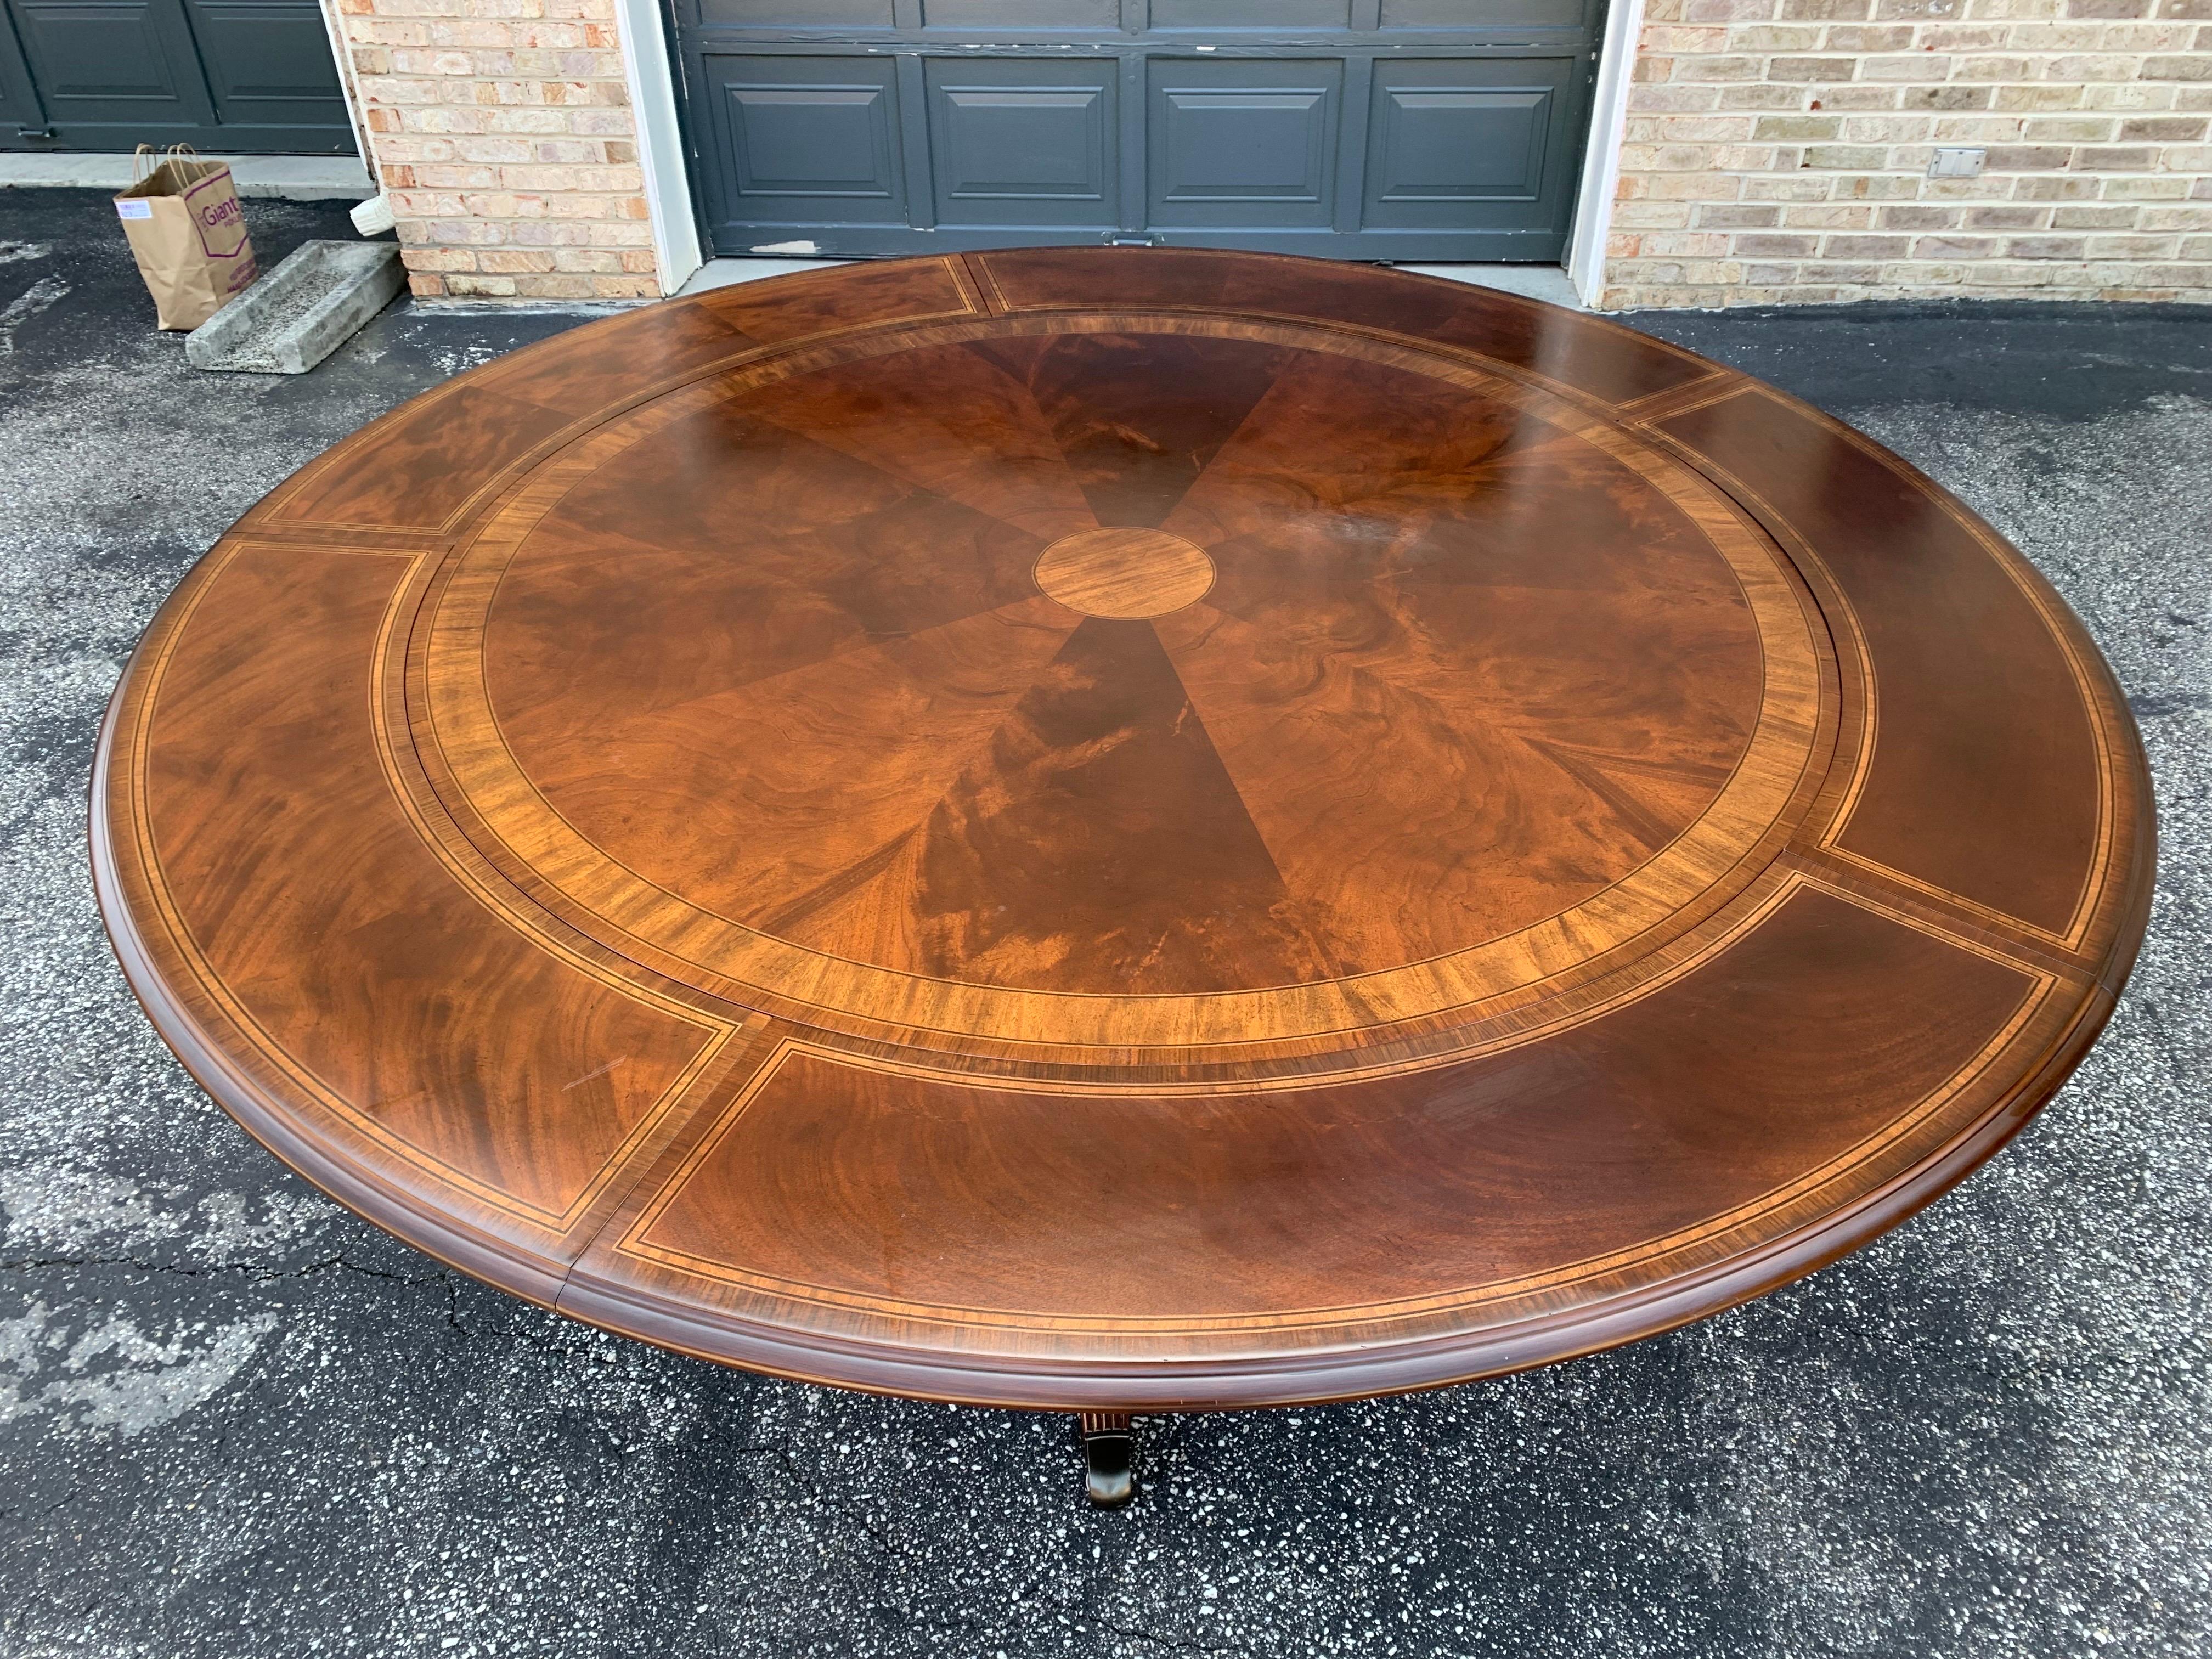 Mahogany Round Dining Table with Perimeter Leaves Oversized 5